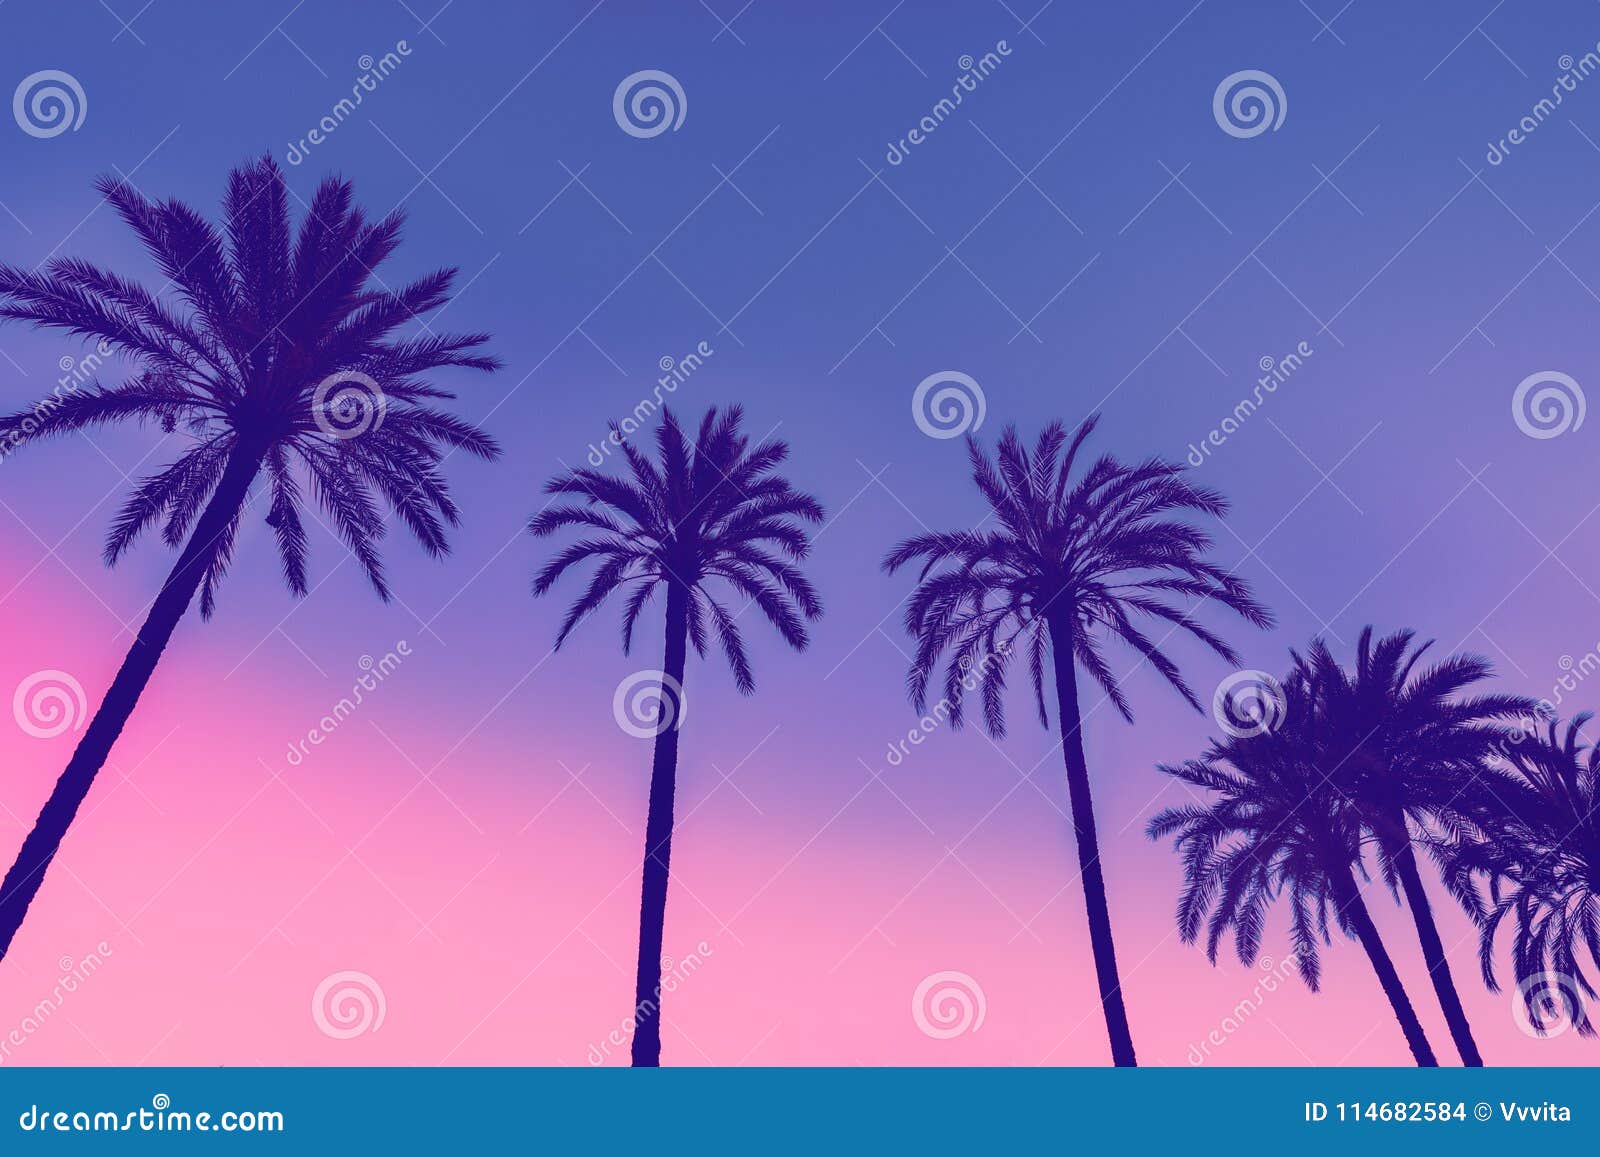 Miami Tropical Palm Tree Illustration Vice Color Sunset Wall